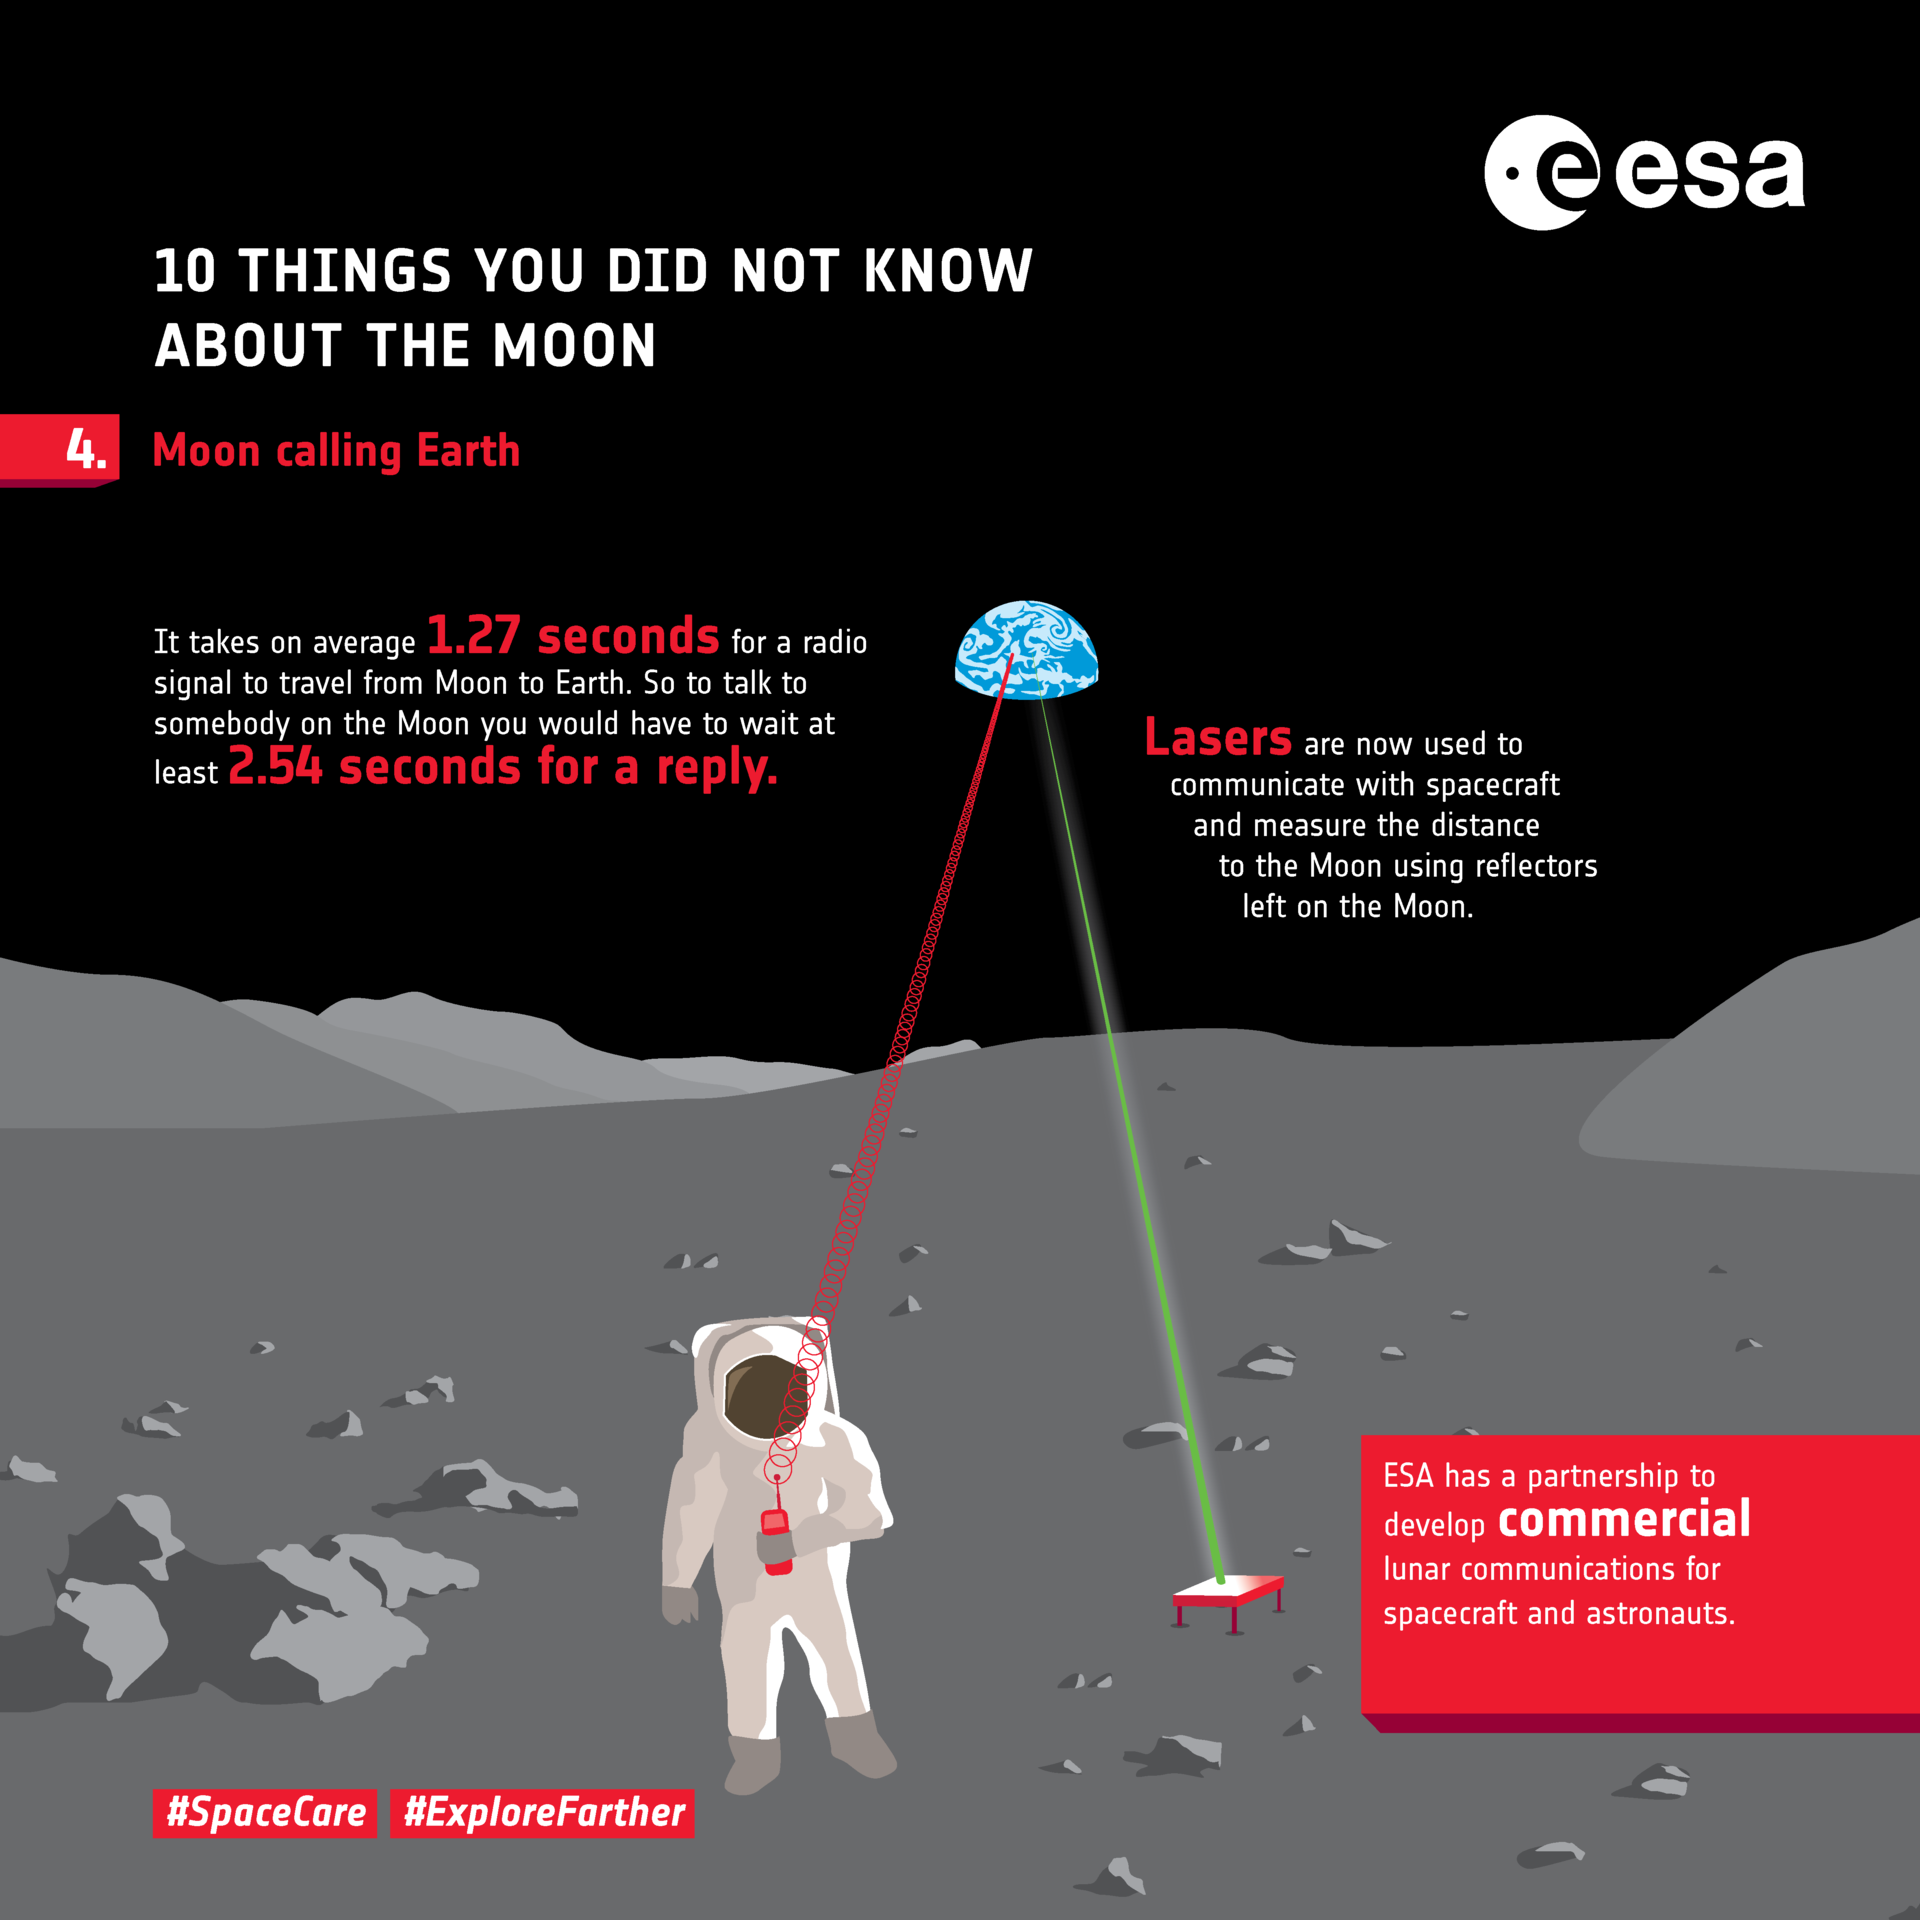 Ten things you did not know about the Moon: 4. Communications